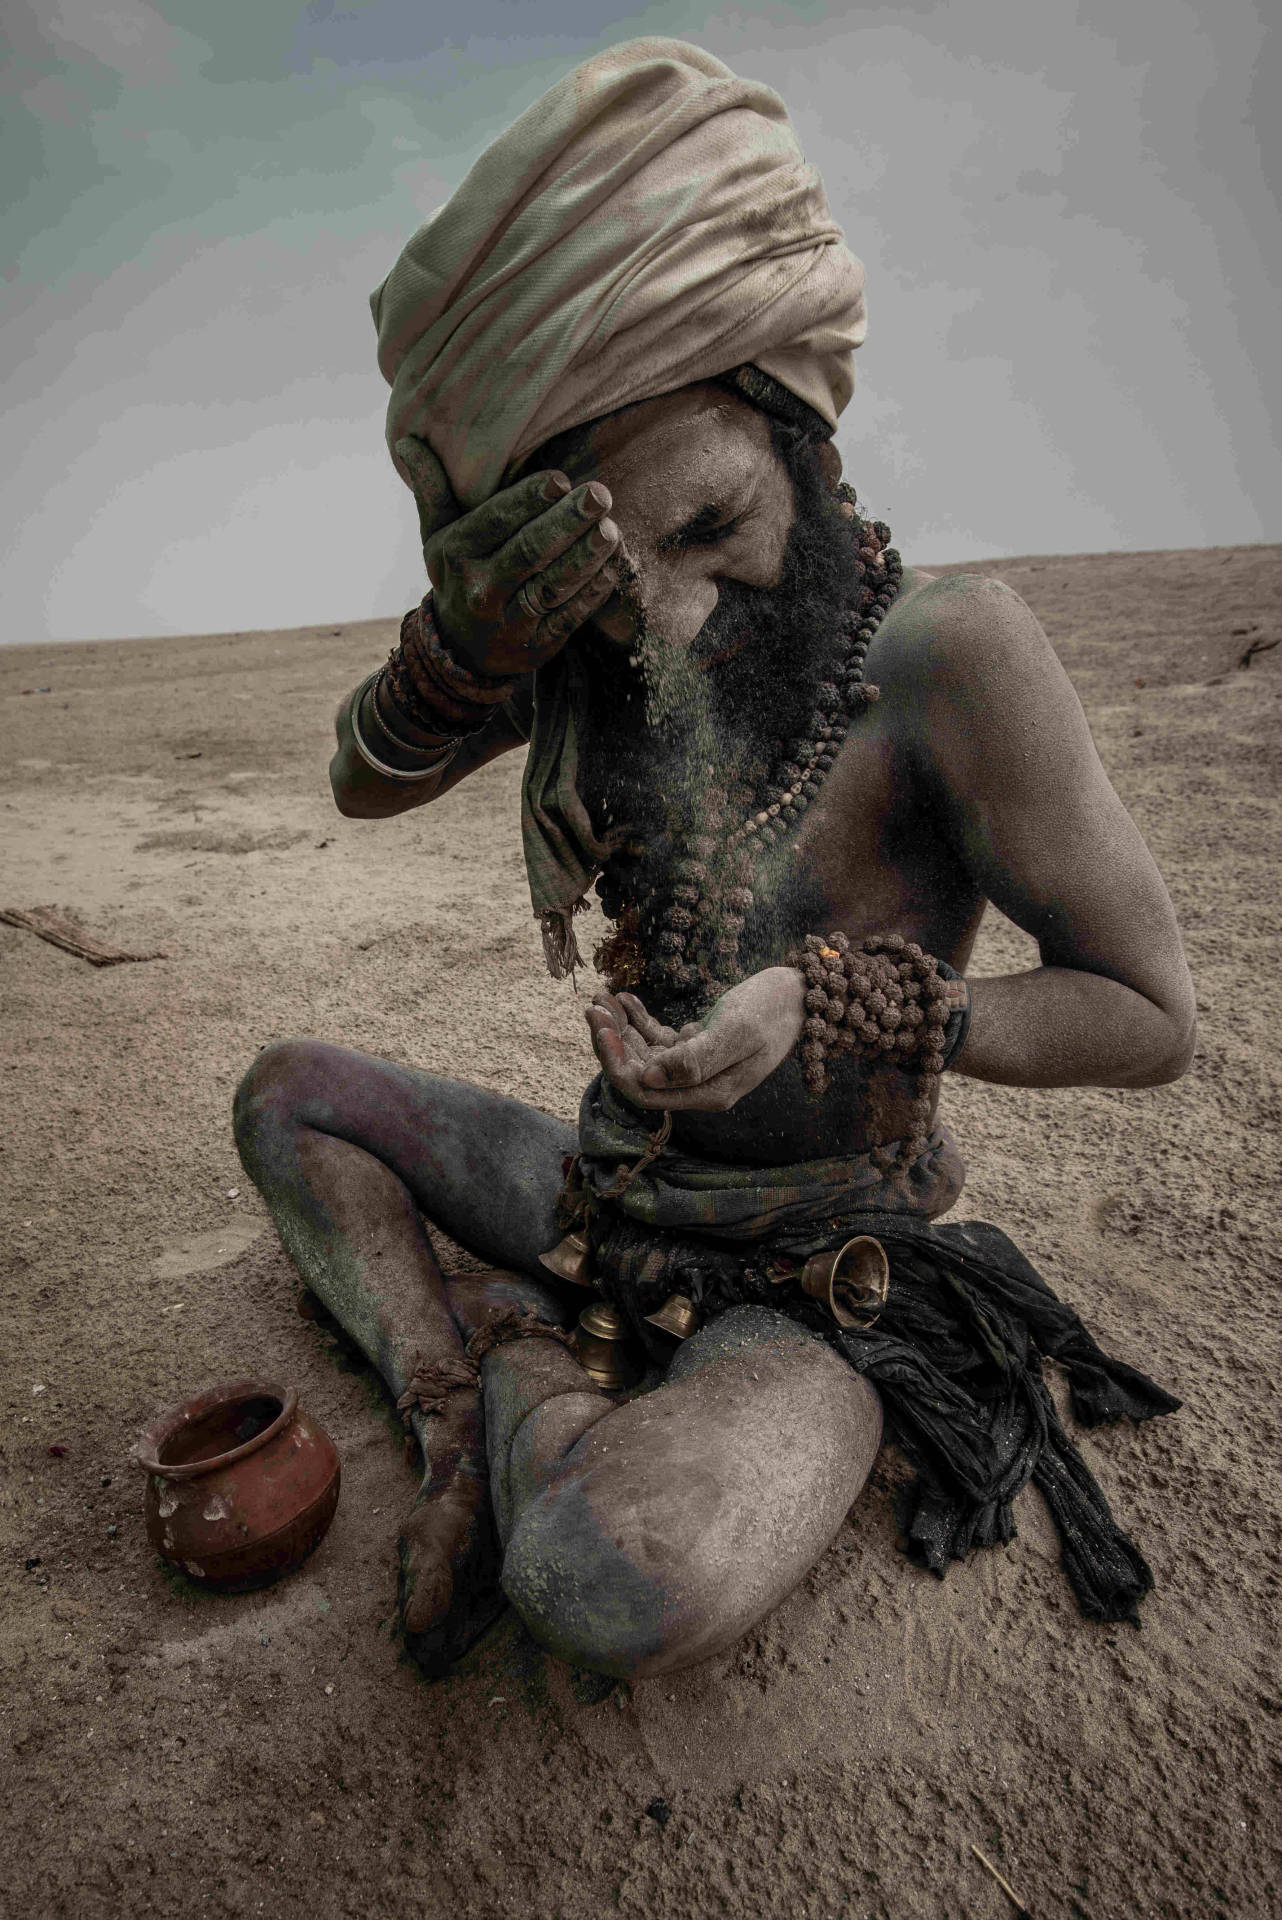 Aghori Painting Himself With Ashes Wallpaper